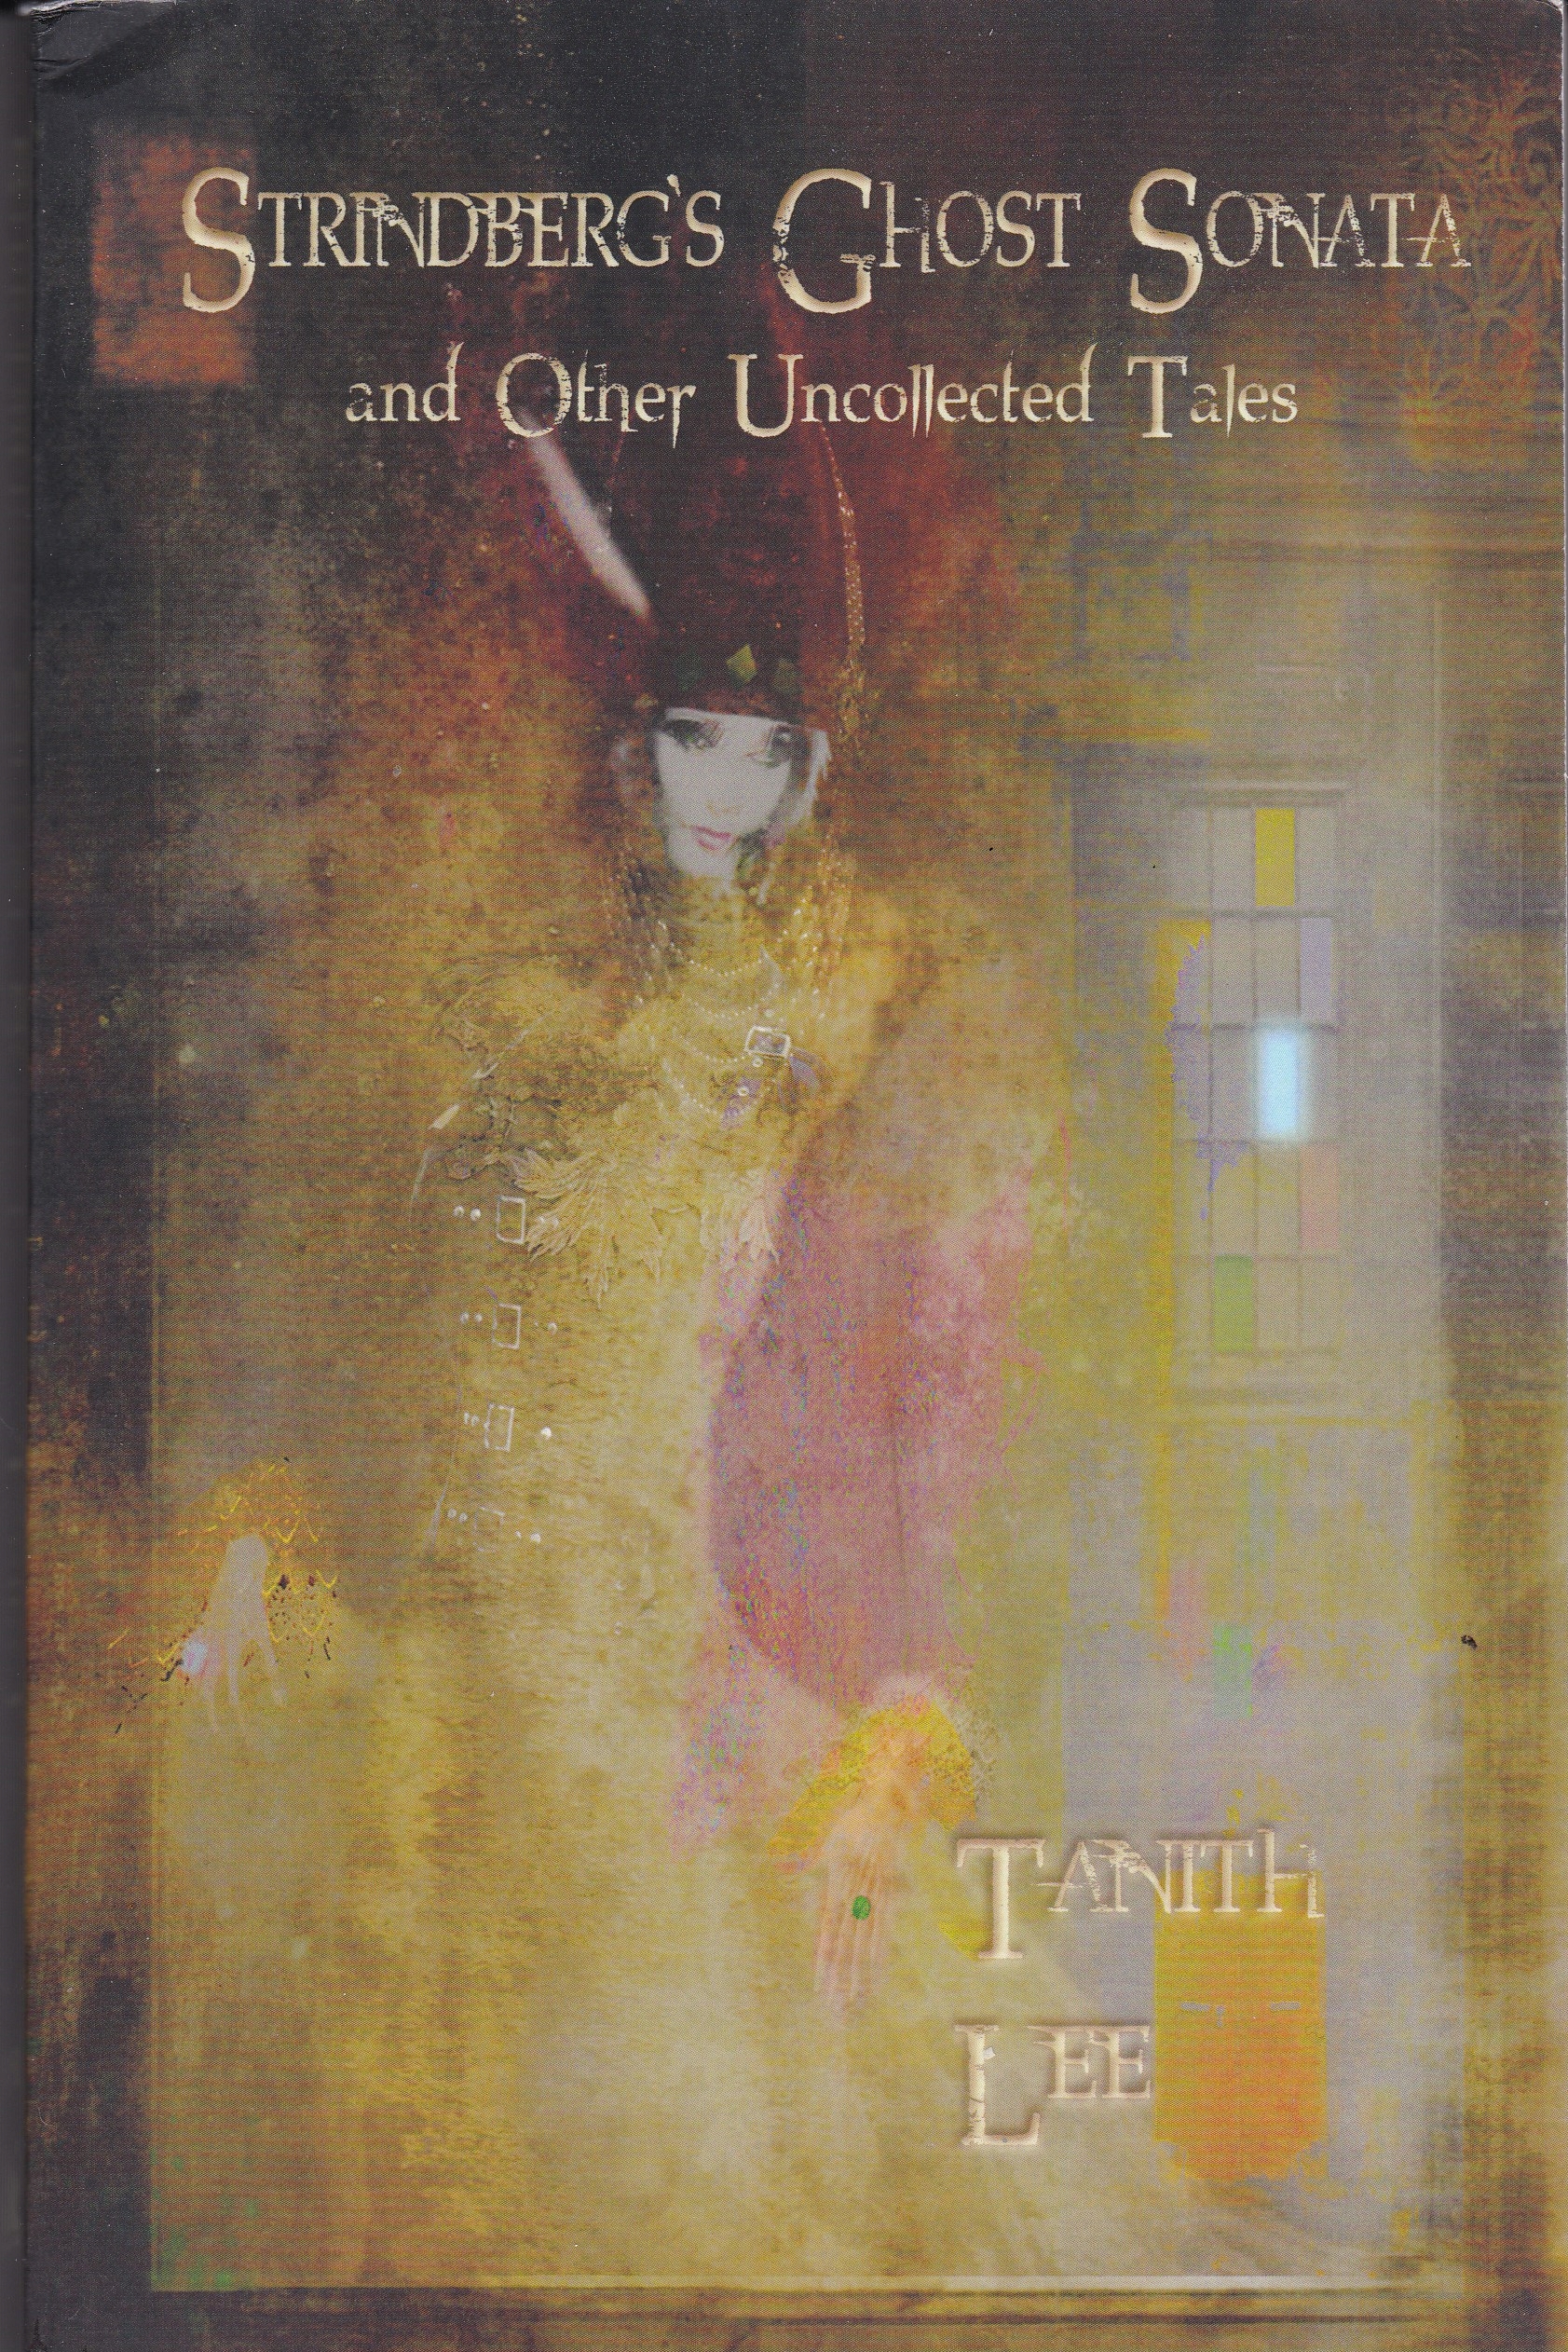 Strindberg's Ghost Sonata And Other Uncollected Tales